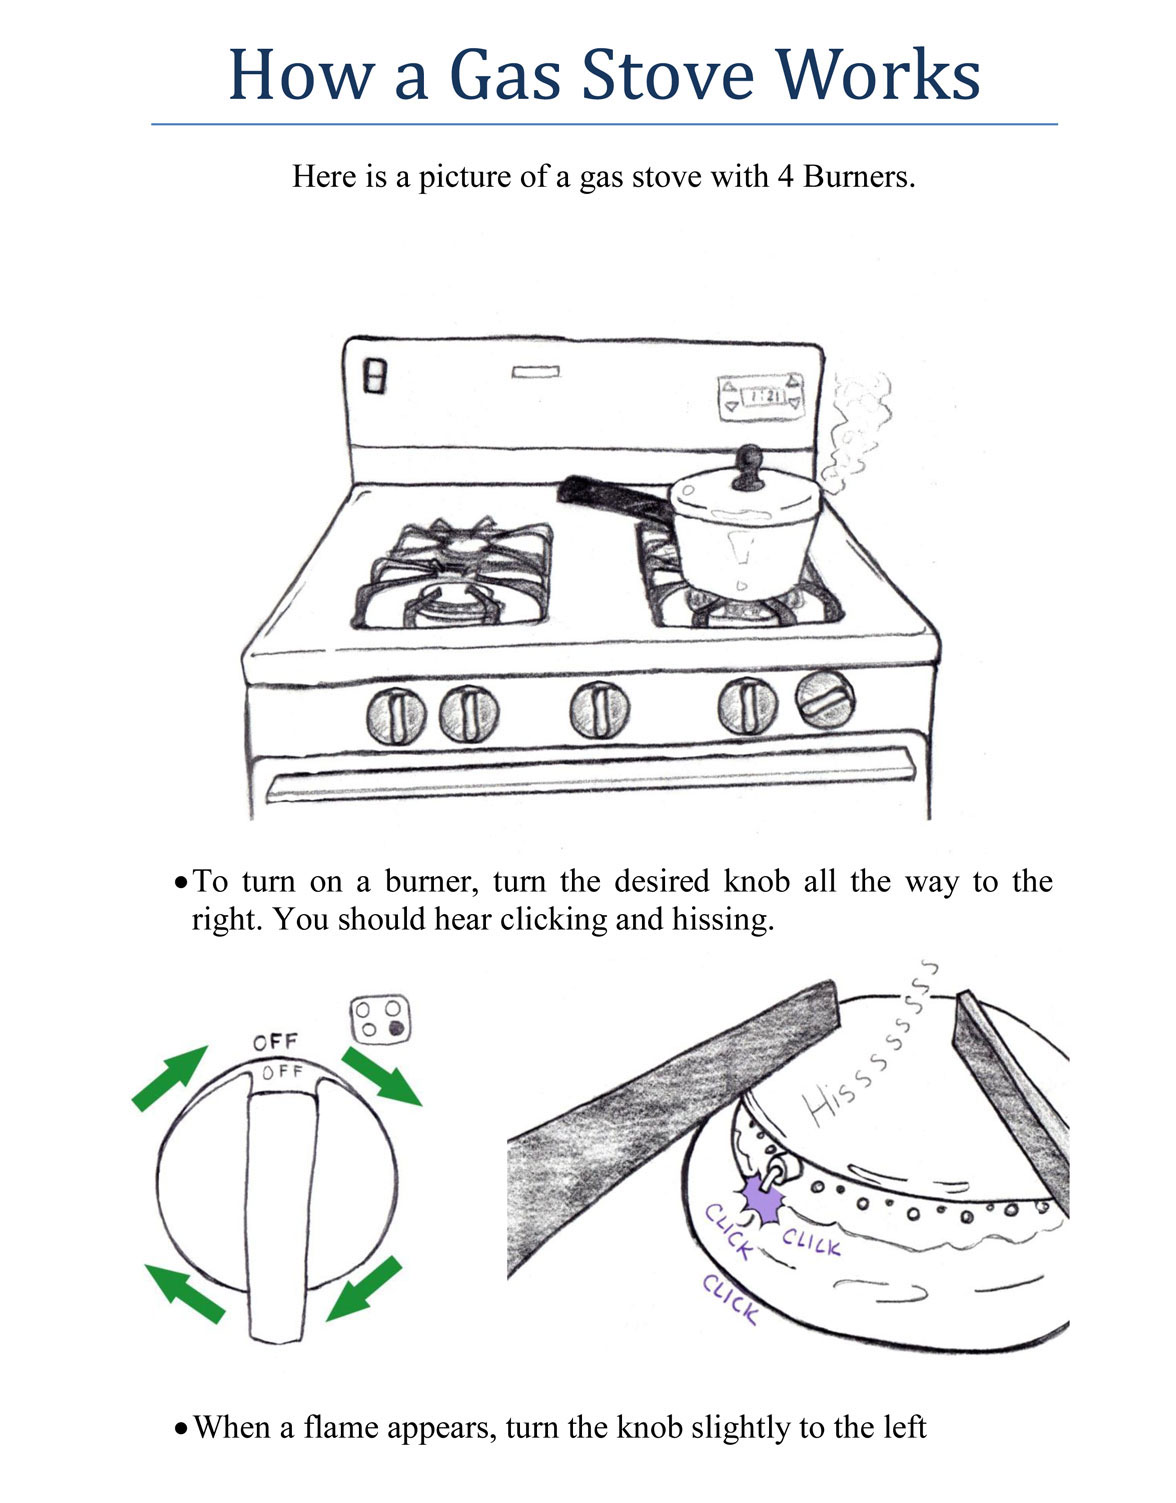 stove how to Work  Gas  propane natural Click flame turn on off instruction instructional instructions design Office word photoshop Microsoft simple easy